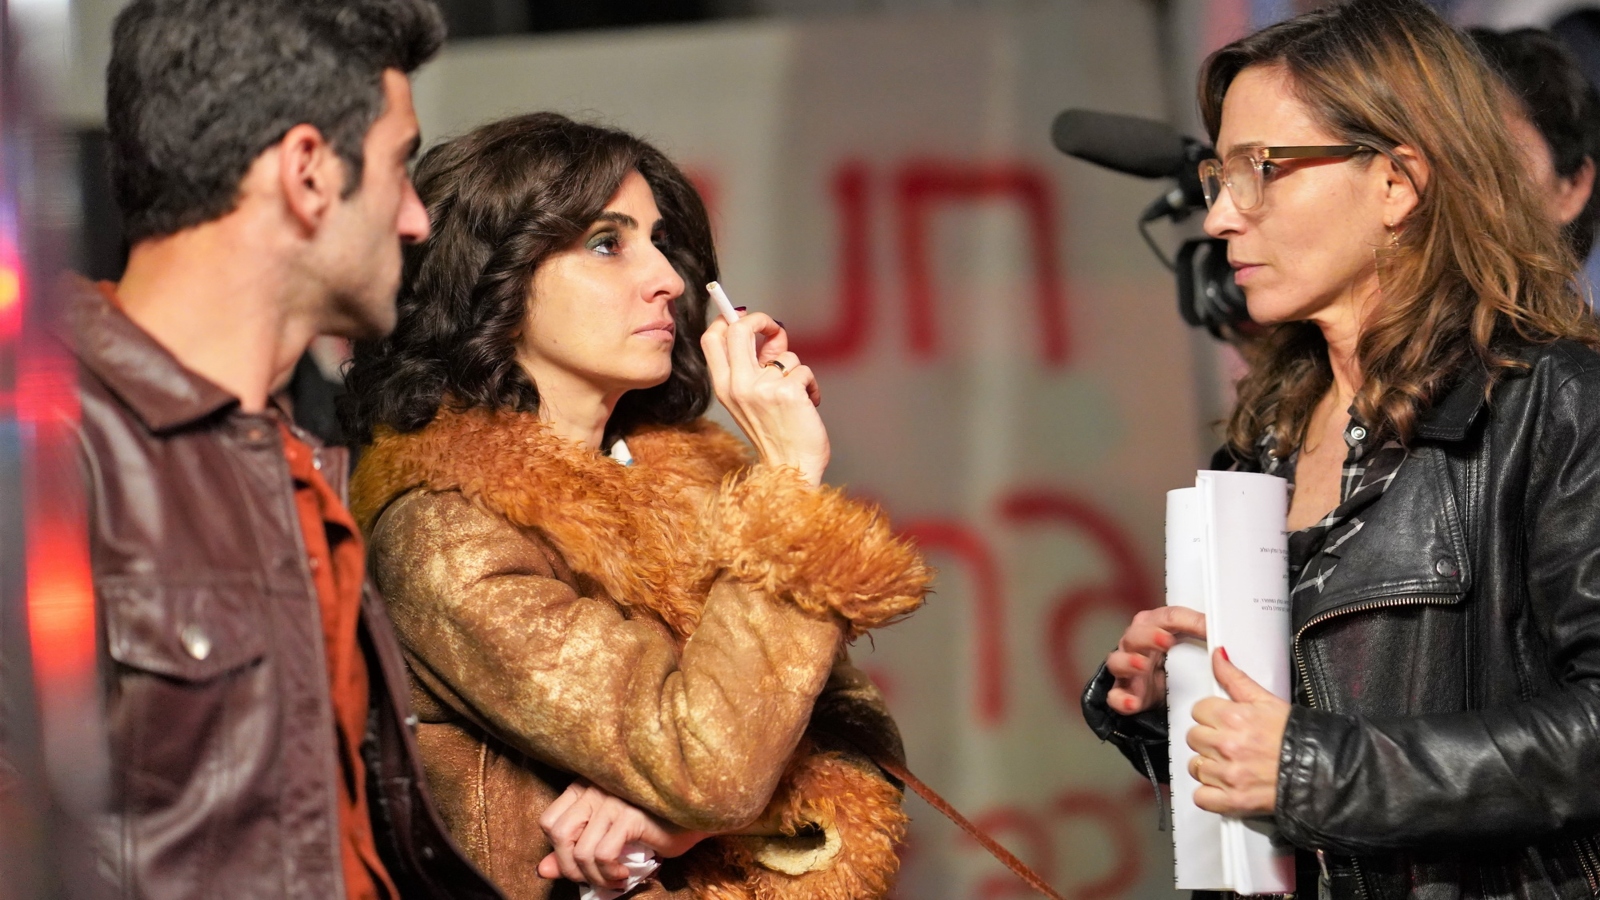 Israeli director Zohar Wagner, far right, on set of “Savoy” with actors Dana Ivgy and Amir Bitton. Photo by Michael Olmert courtesy of Jerusalem Film Festival